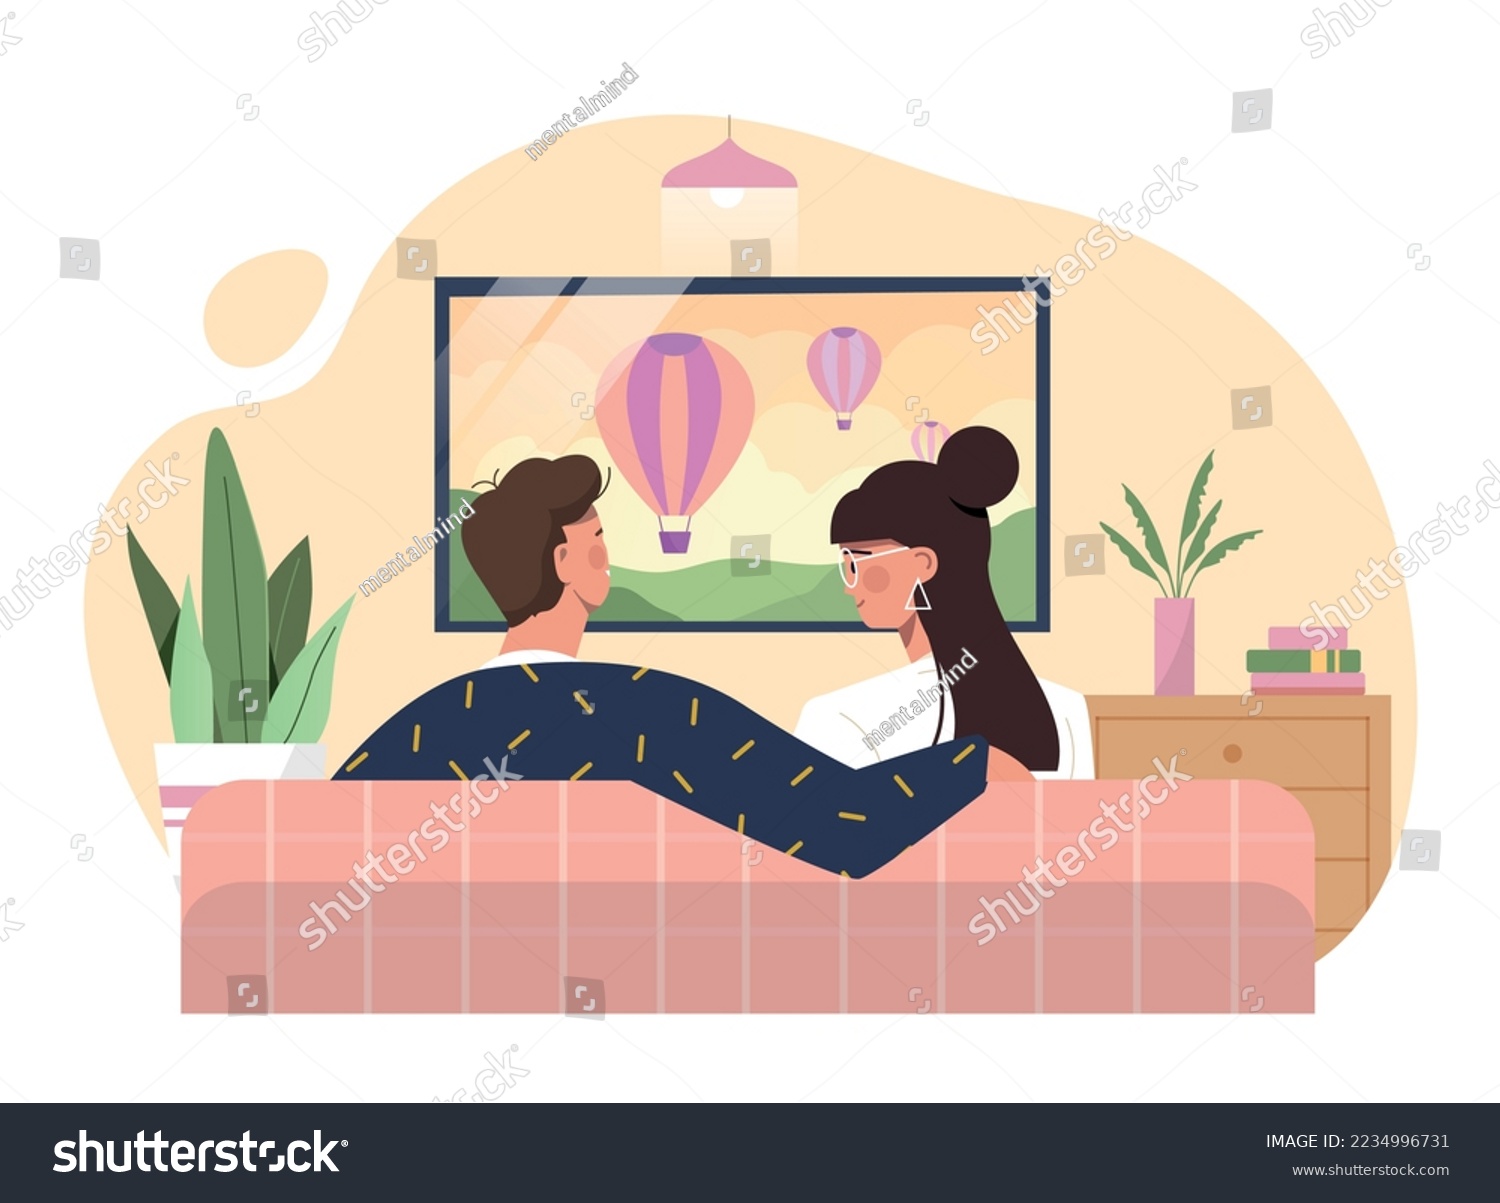 SVG of People watching TV. Man and woman sit on couch and look at screen. Young couple resting after work or study. Characters watching movies and series in evening. Cartoon flat vector illustration svg